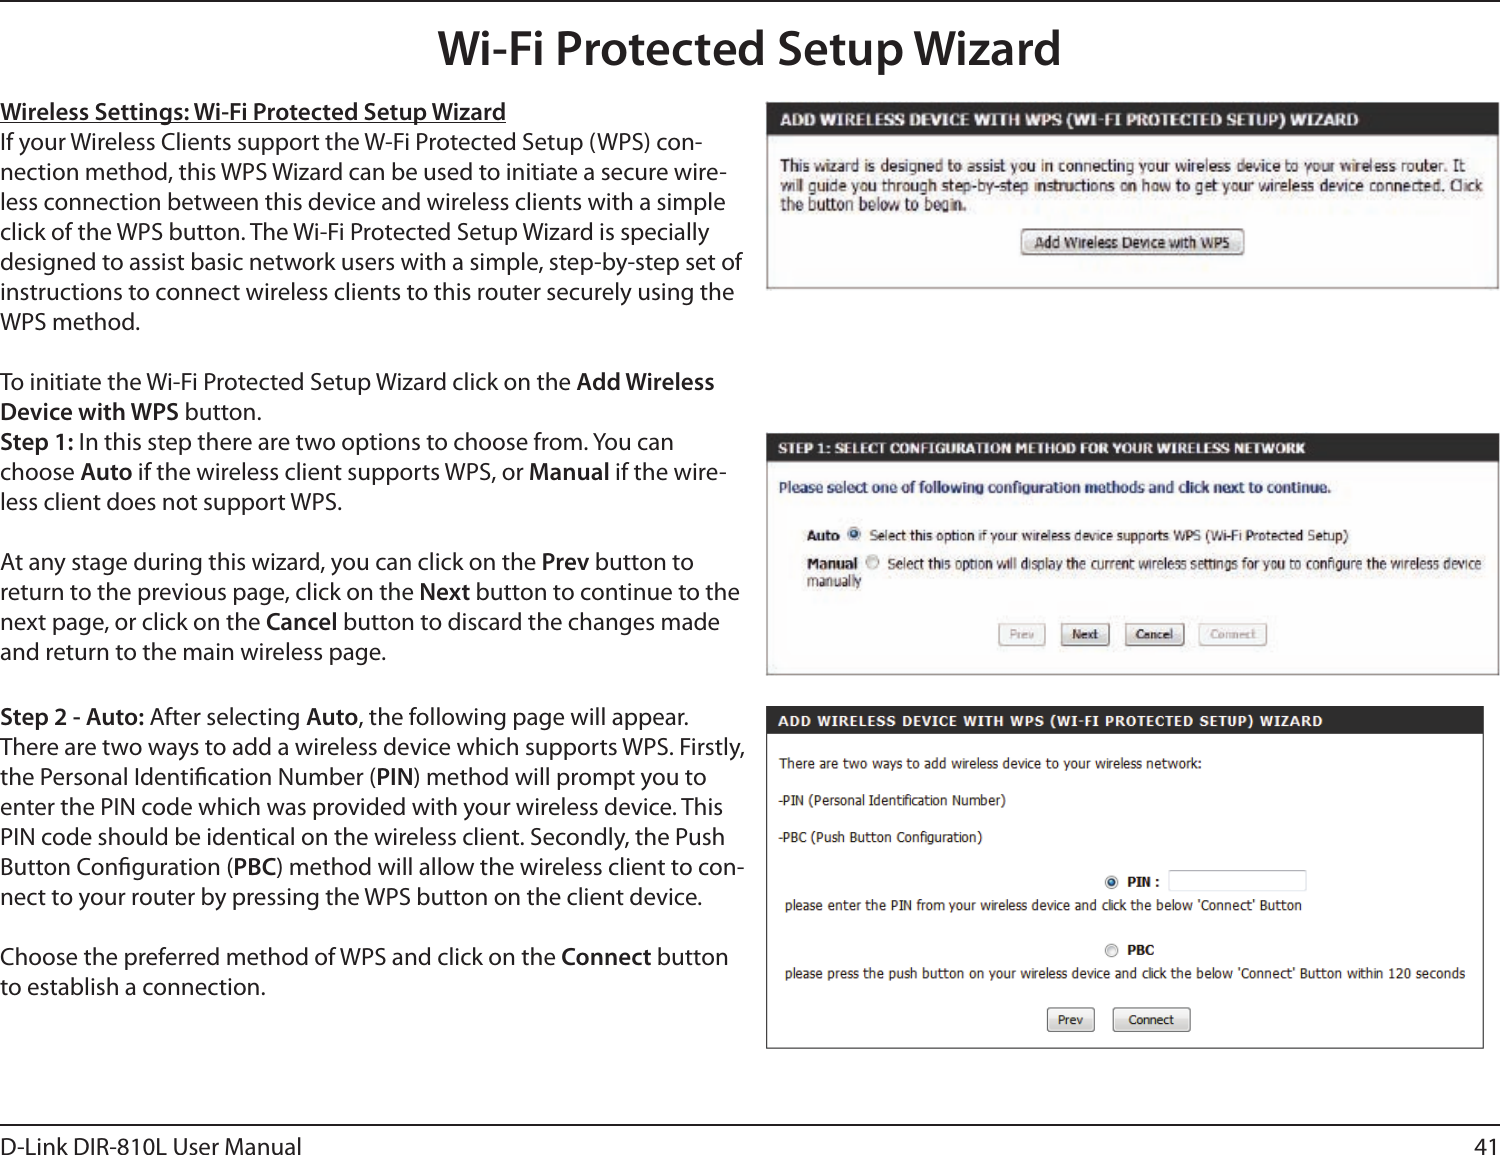 41D-Link DIR-810L User ManualWireless Settings: Wi-Fi Protected Setup WizardIf your Wireless Clients support the W-Fi Protected Setup (WPS) con-nection method, this WPS Wizard can be used to initiate a secure wire-less connection between this device and wireless clients with a simple click of the WPS button. The Wi-Fi Protected Setup Wizard is specially designed to assist basic network users with a simple, step-by-step set of instructions to connect wireless clients to this router securely using the WPS method.To initiate the Wi-Fi Protected Setup Wizard click on the Add Wireless Device with WPS button.Step 1: In this step there are two options to choose from. You can choose Auto if the wireless client supports WPS, or Manual if the wire-less client does not support WPS.At any stage during this wizard, you can click on the Prev button to return to the previous page, click on the Next button to continue to the next page, or click on the Cancel button to discard the changes made and return to the main wireless page.Step 2 - Auto: After selecting Auto, the following page will appear. There are two ways to add a wireless device which supports WPS. Firstly, the Personal Identication Number (PIN) method will prompt you to enter the PIN code which was provided with your wireless device. This PIN code should be identical on the wireless client. Secondly, the Push Button Conguration (PBC) method will allow the wireless client to con-nect to your router by pressing the WPS button on the client device.Choose the preferred method of WPS and click on the Connect button to establish a connection. Wi-Fi Protected Setup Wizard